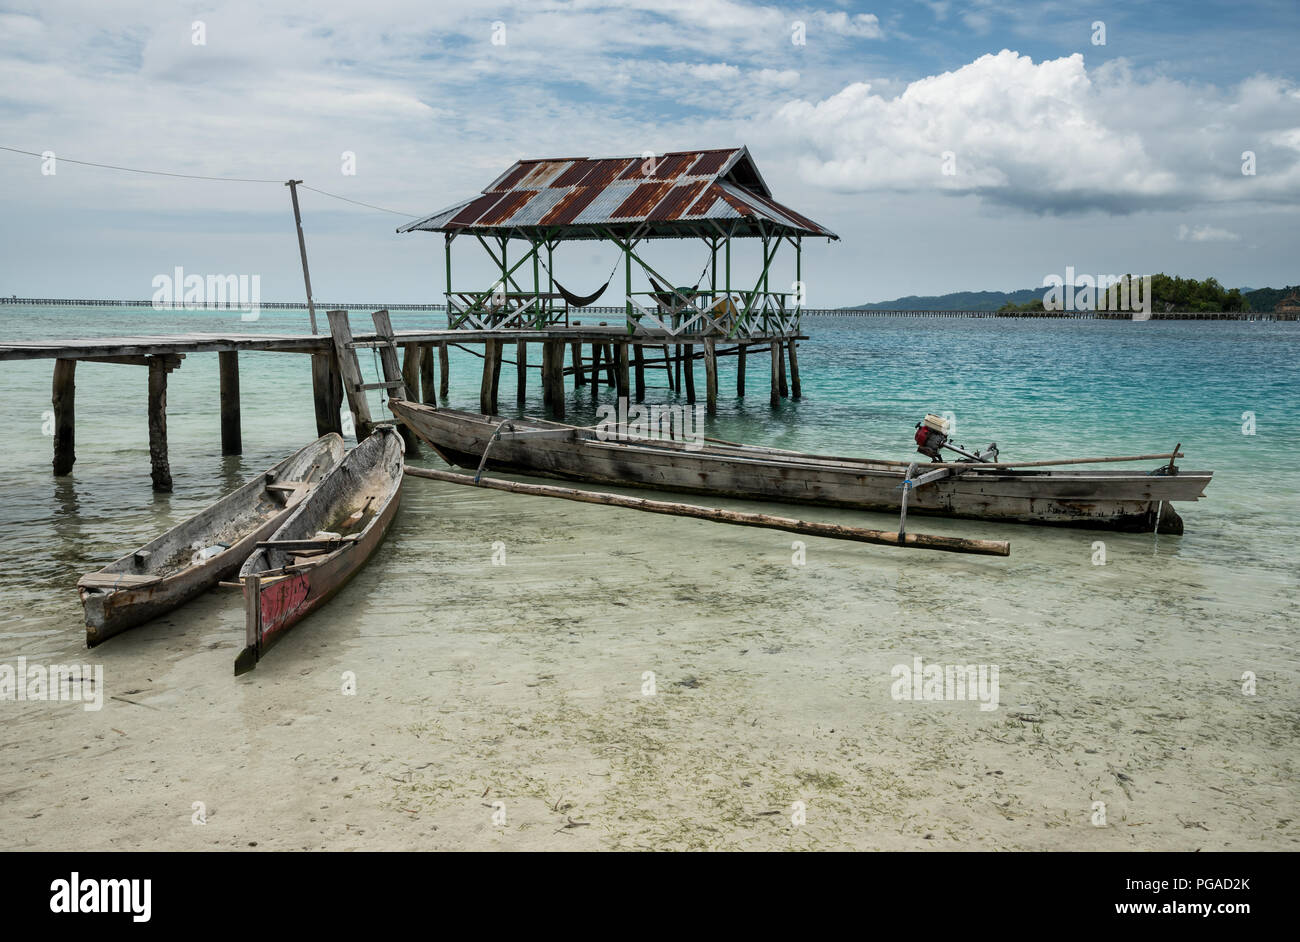 Tropical sand beach resort on remote Malenge island, part of Togean archipelago with traditional boats, Indonesia Stock Photo